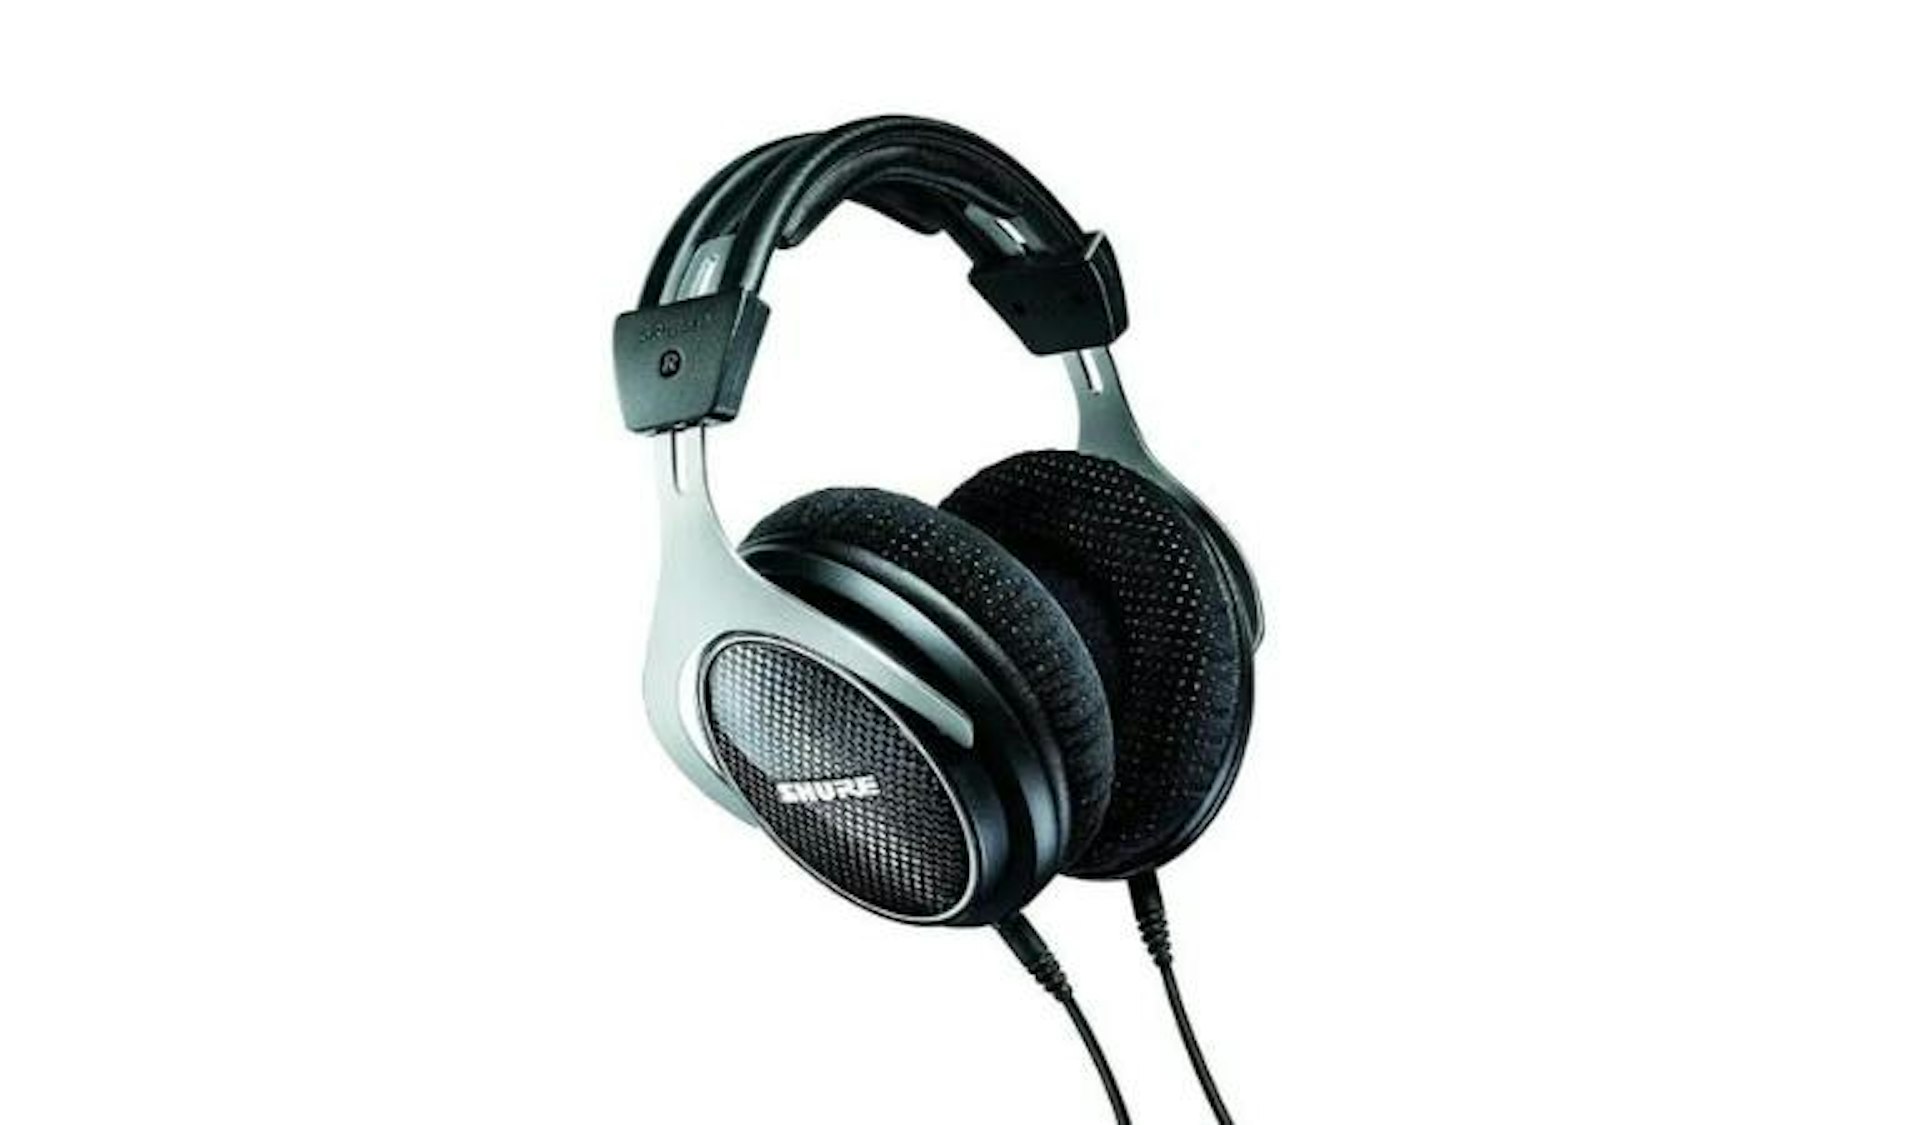 The Shure SRH1540 is one of the best premium podcast headphones.